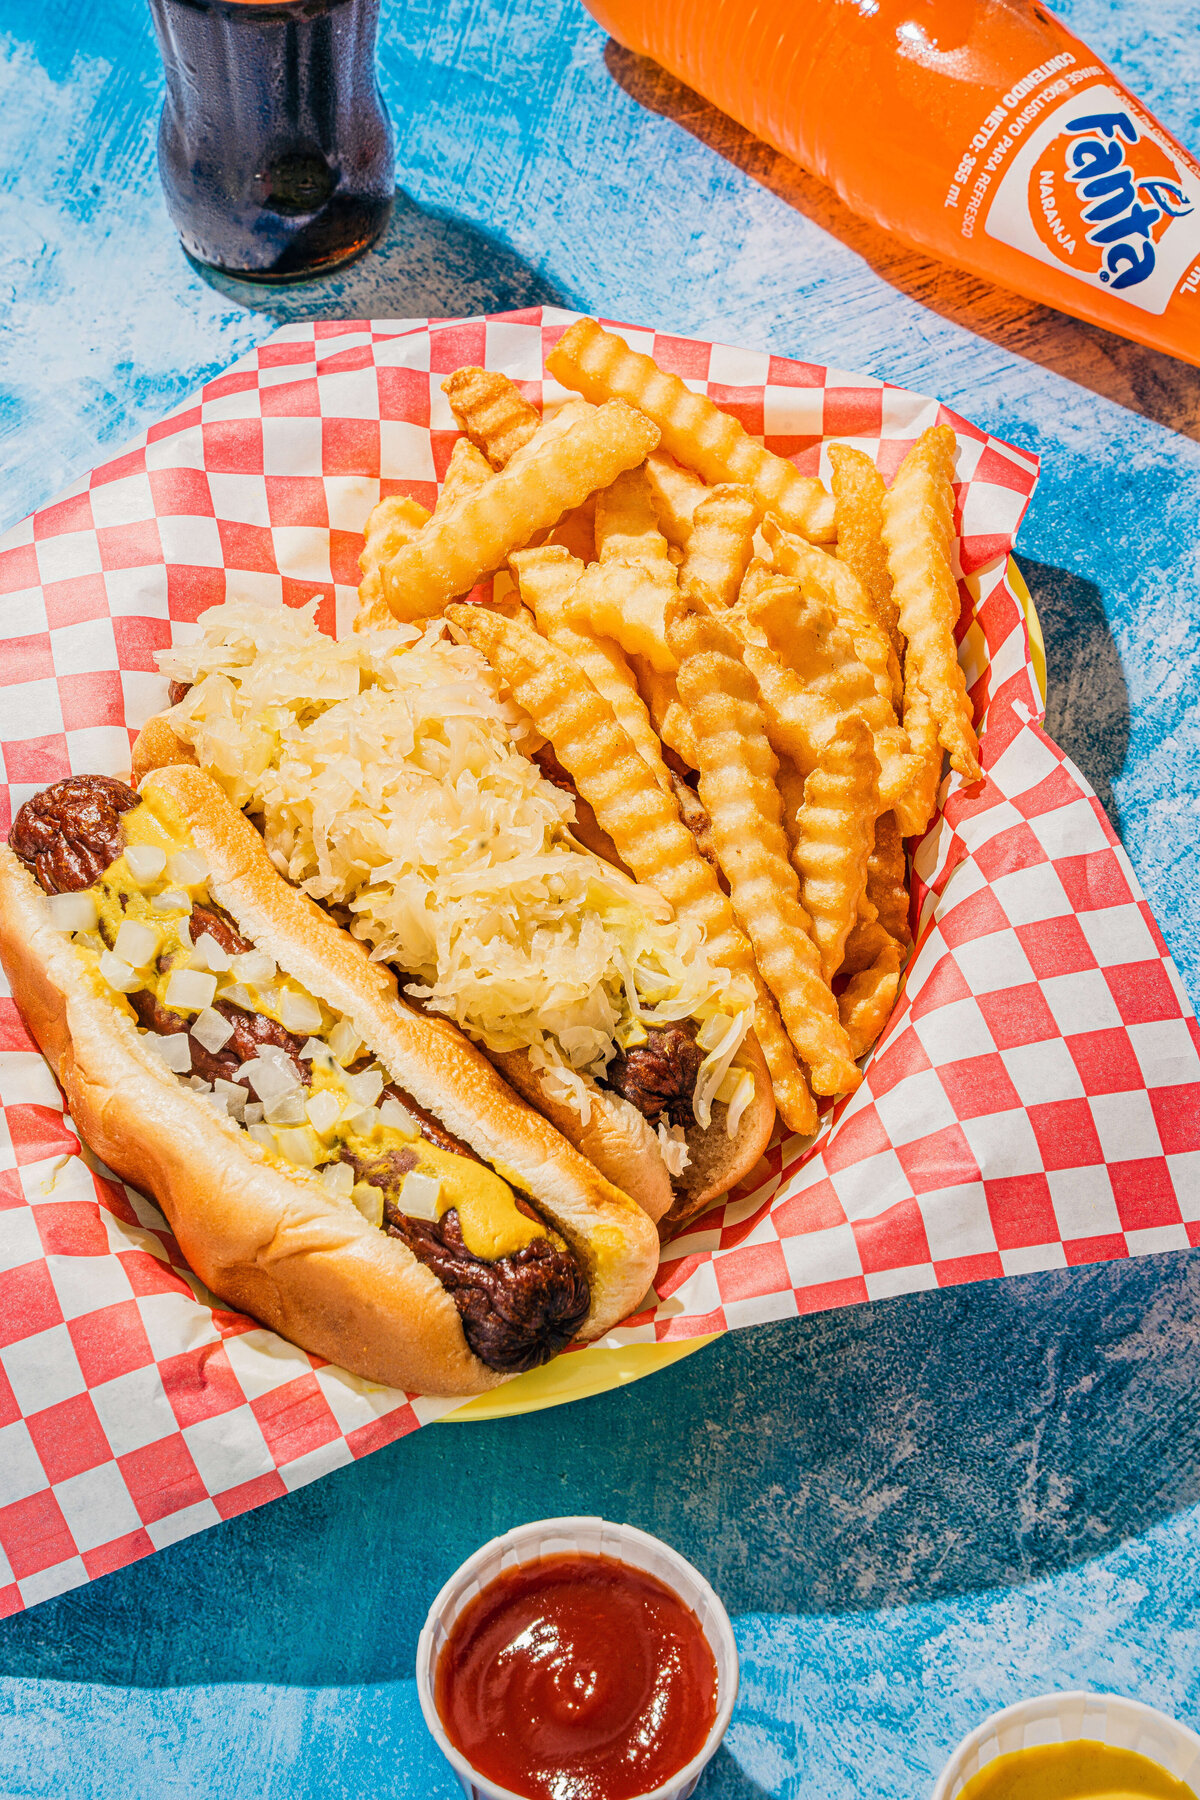 Greenville, SC editorial food photography featuring hot dogs